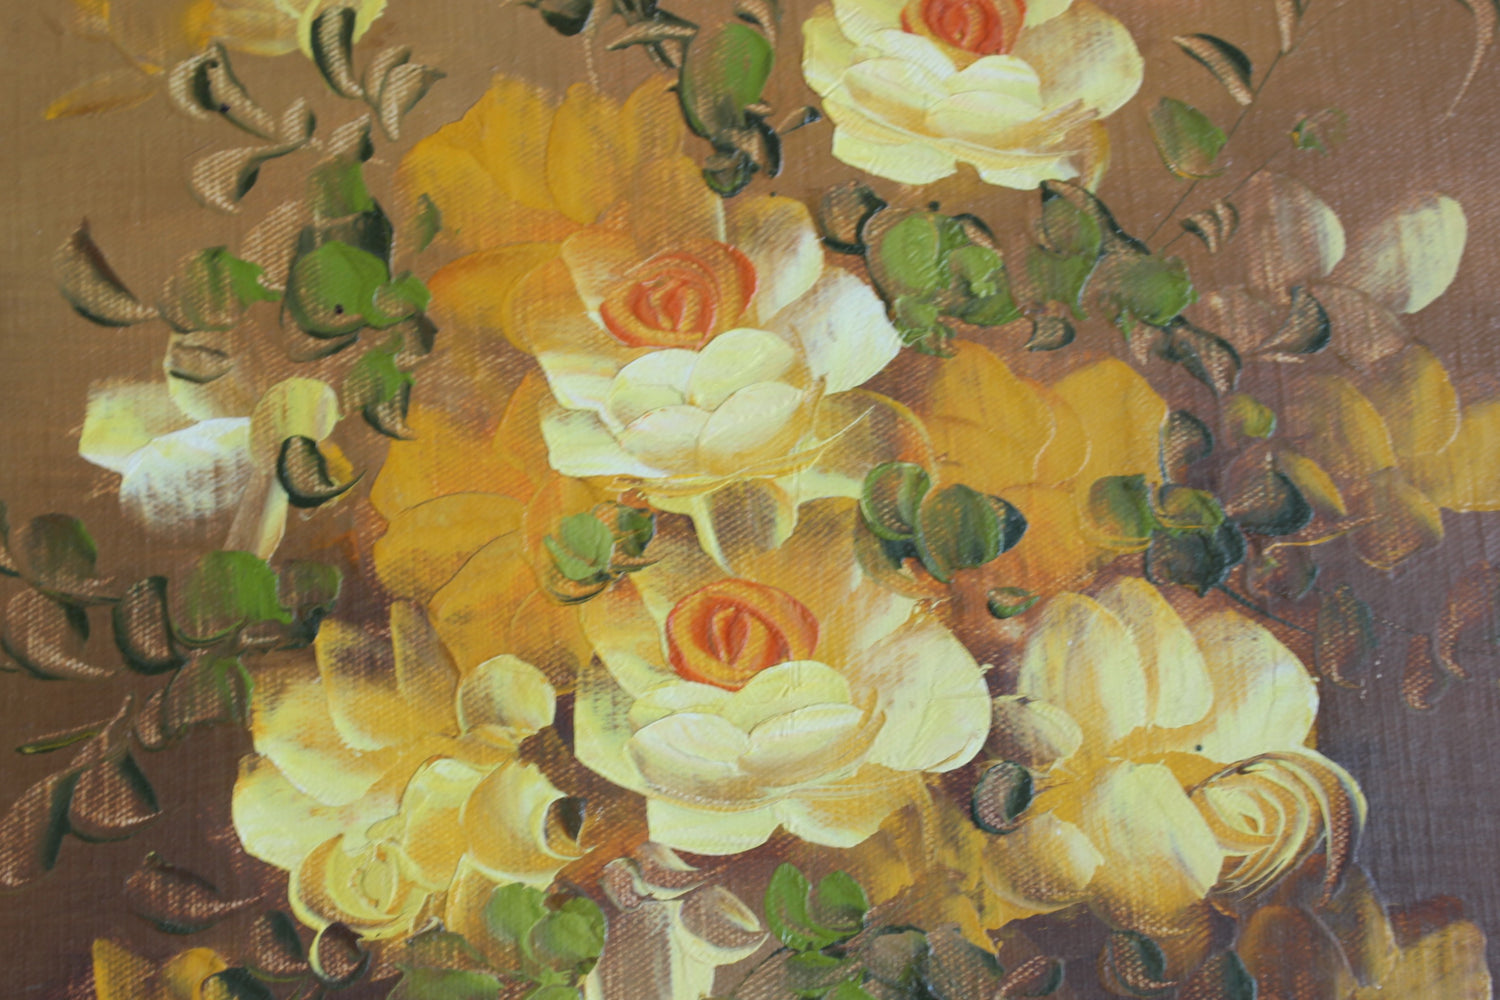 Vintage 1960s Yellow Roses Framed Oil Painting